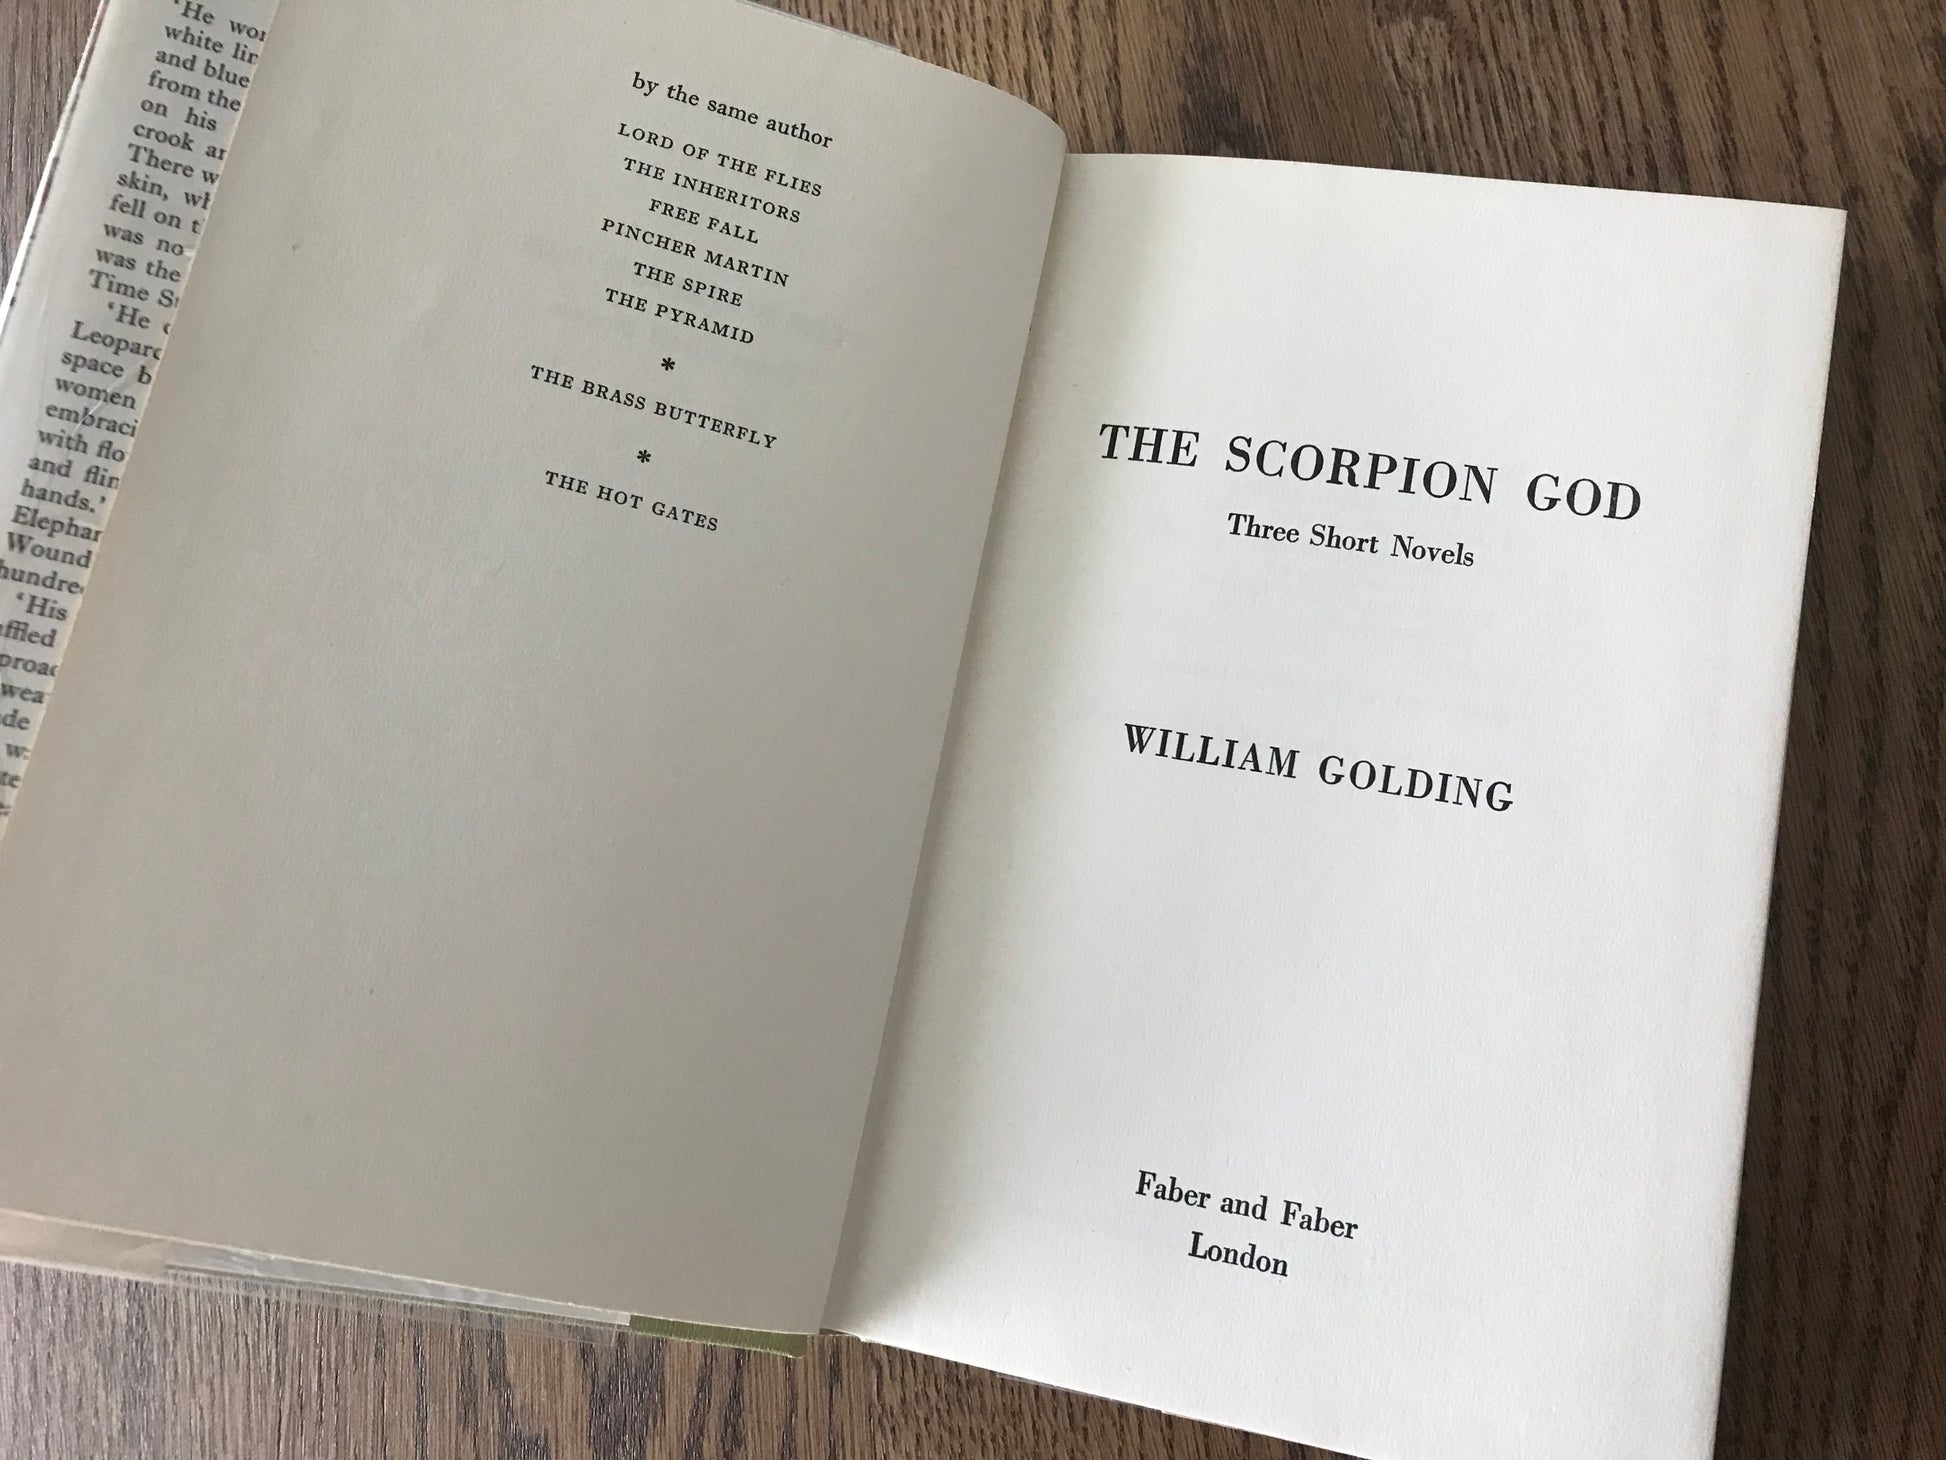 THE SCORPION GOD - BY      WILLIAM GOLDING BooksCardsNBikes